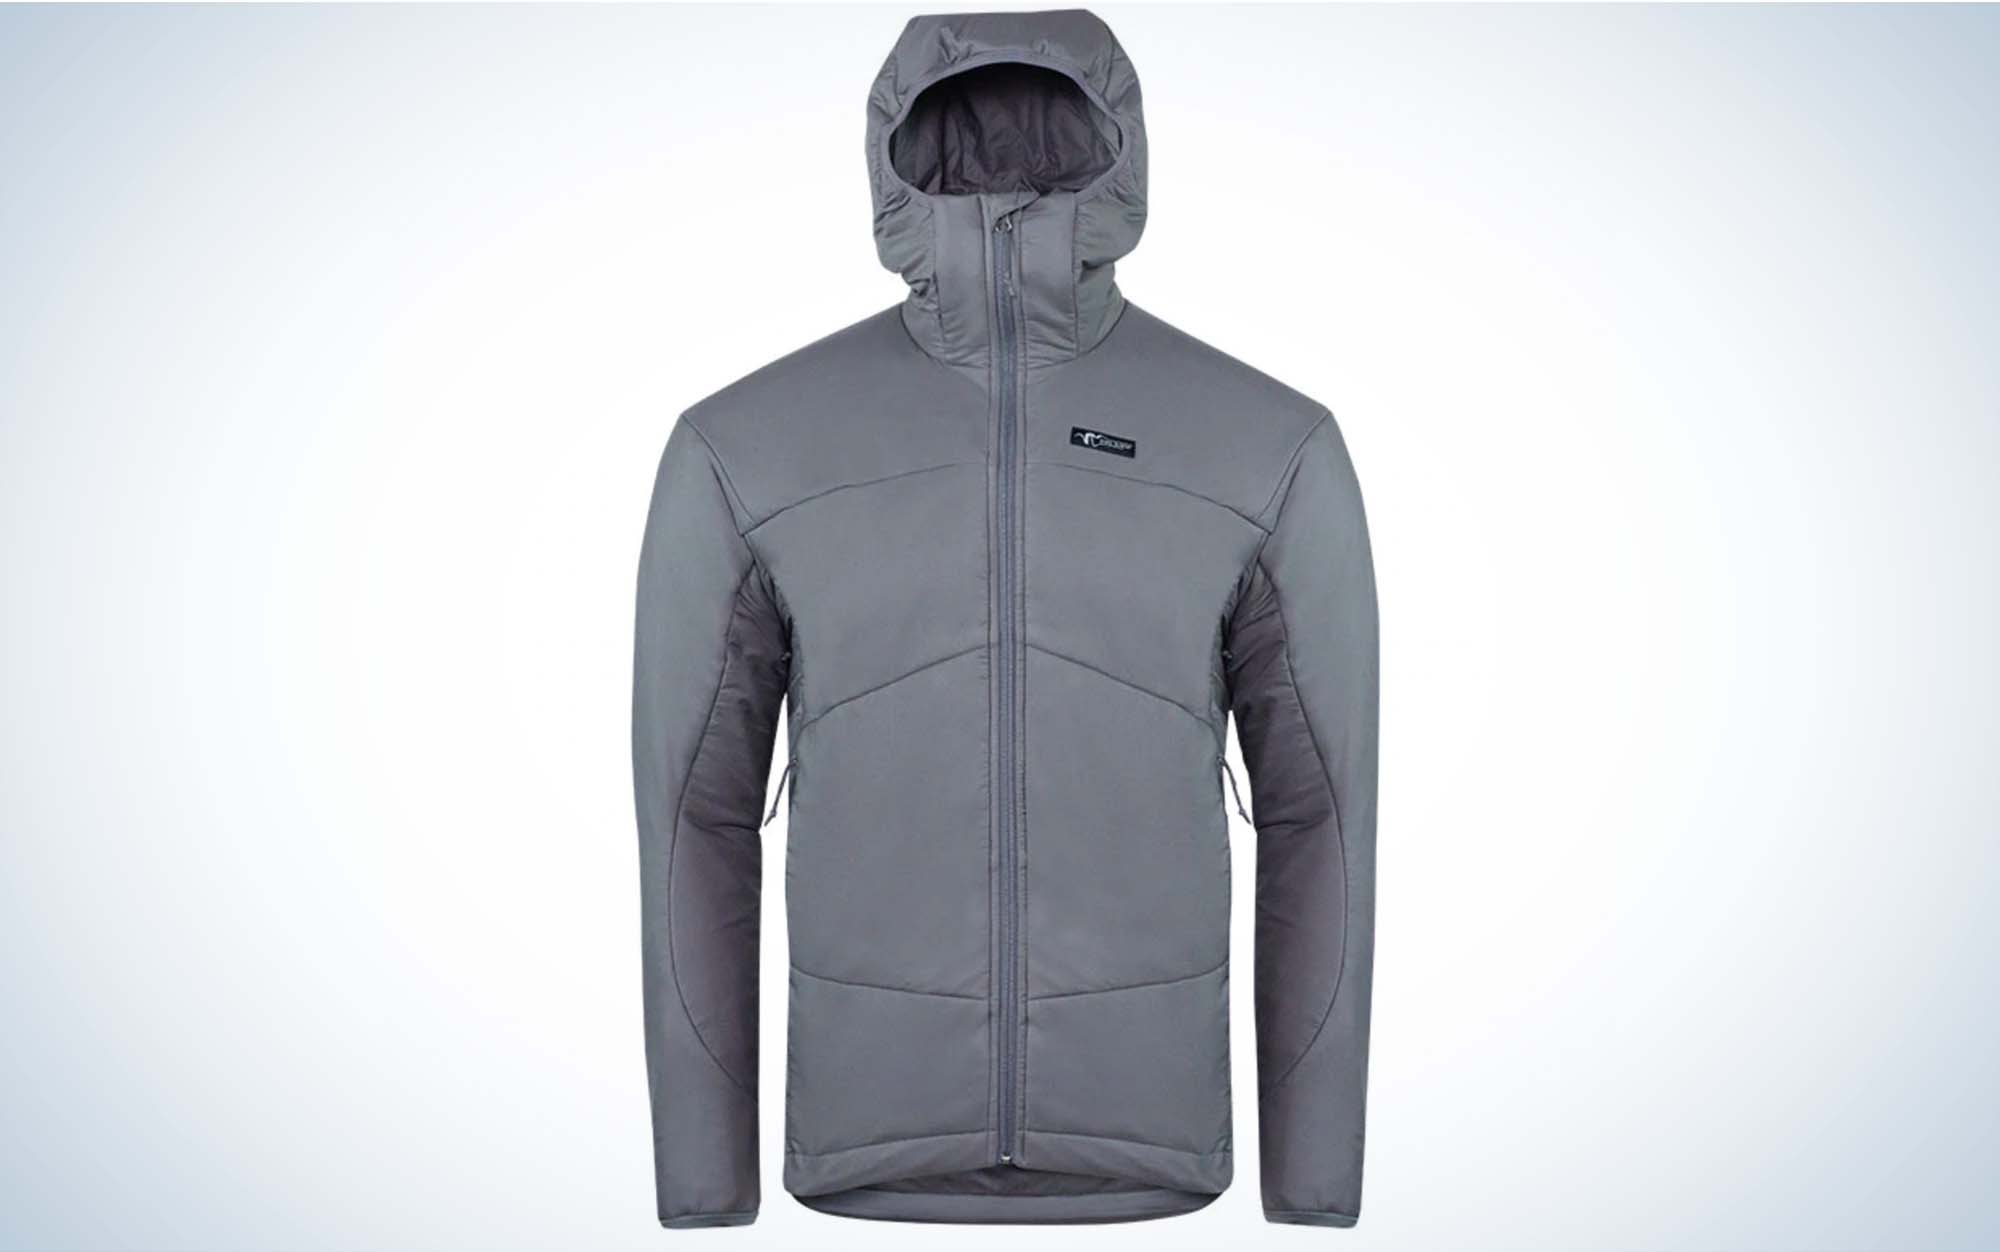 Best layering winter jacket for extreme cold